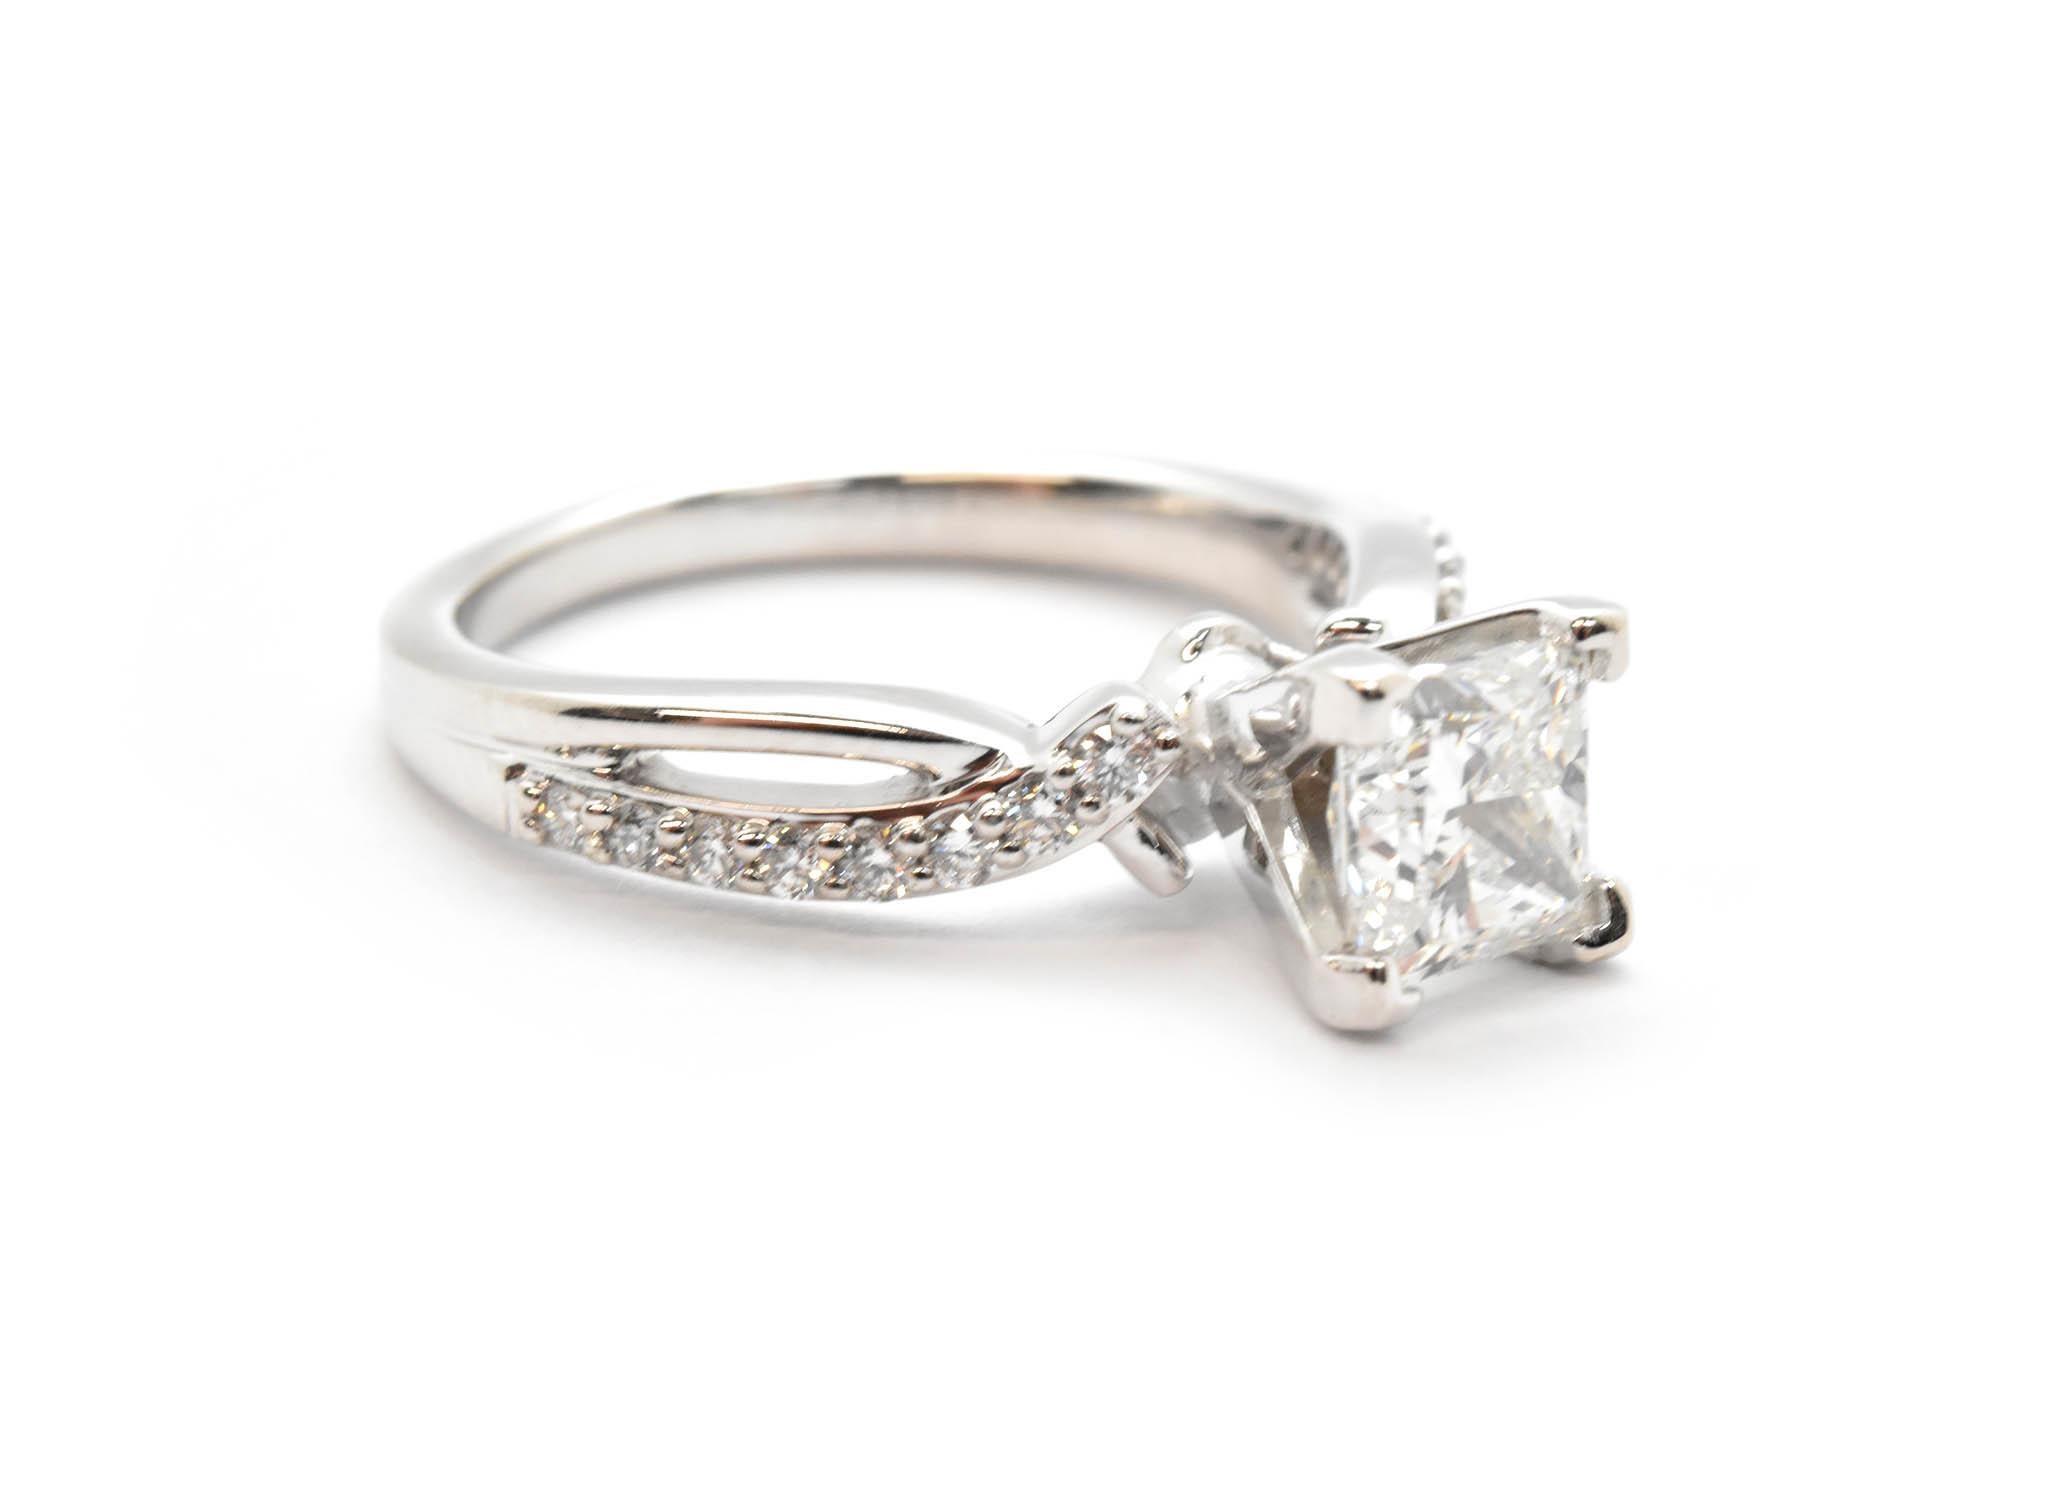 Make this princess cut diamond engagement ring symbolic of your romantic commitment, this engagement ring is designed in 14k white gold and set with a beautiful 1.01ct princess center stone. The center stone is held in place by 4 white gold prongs